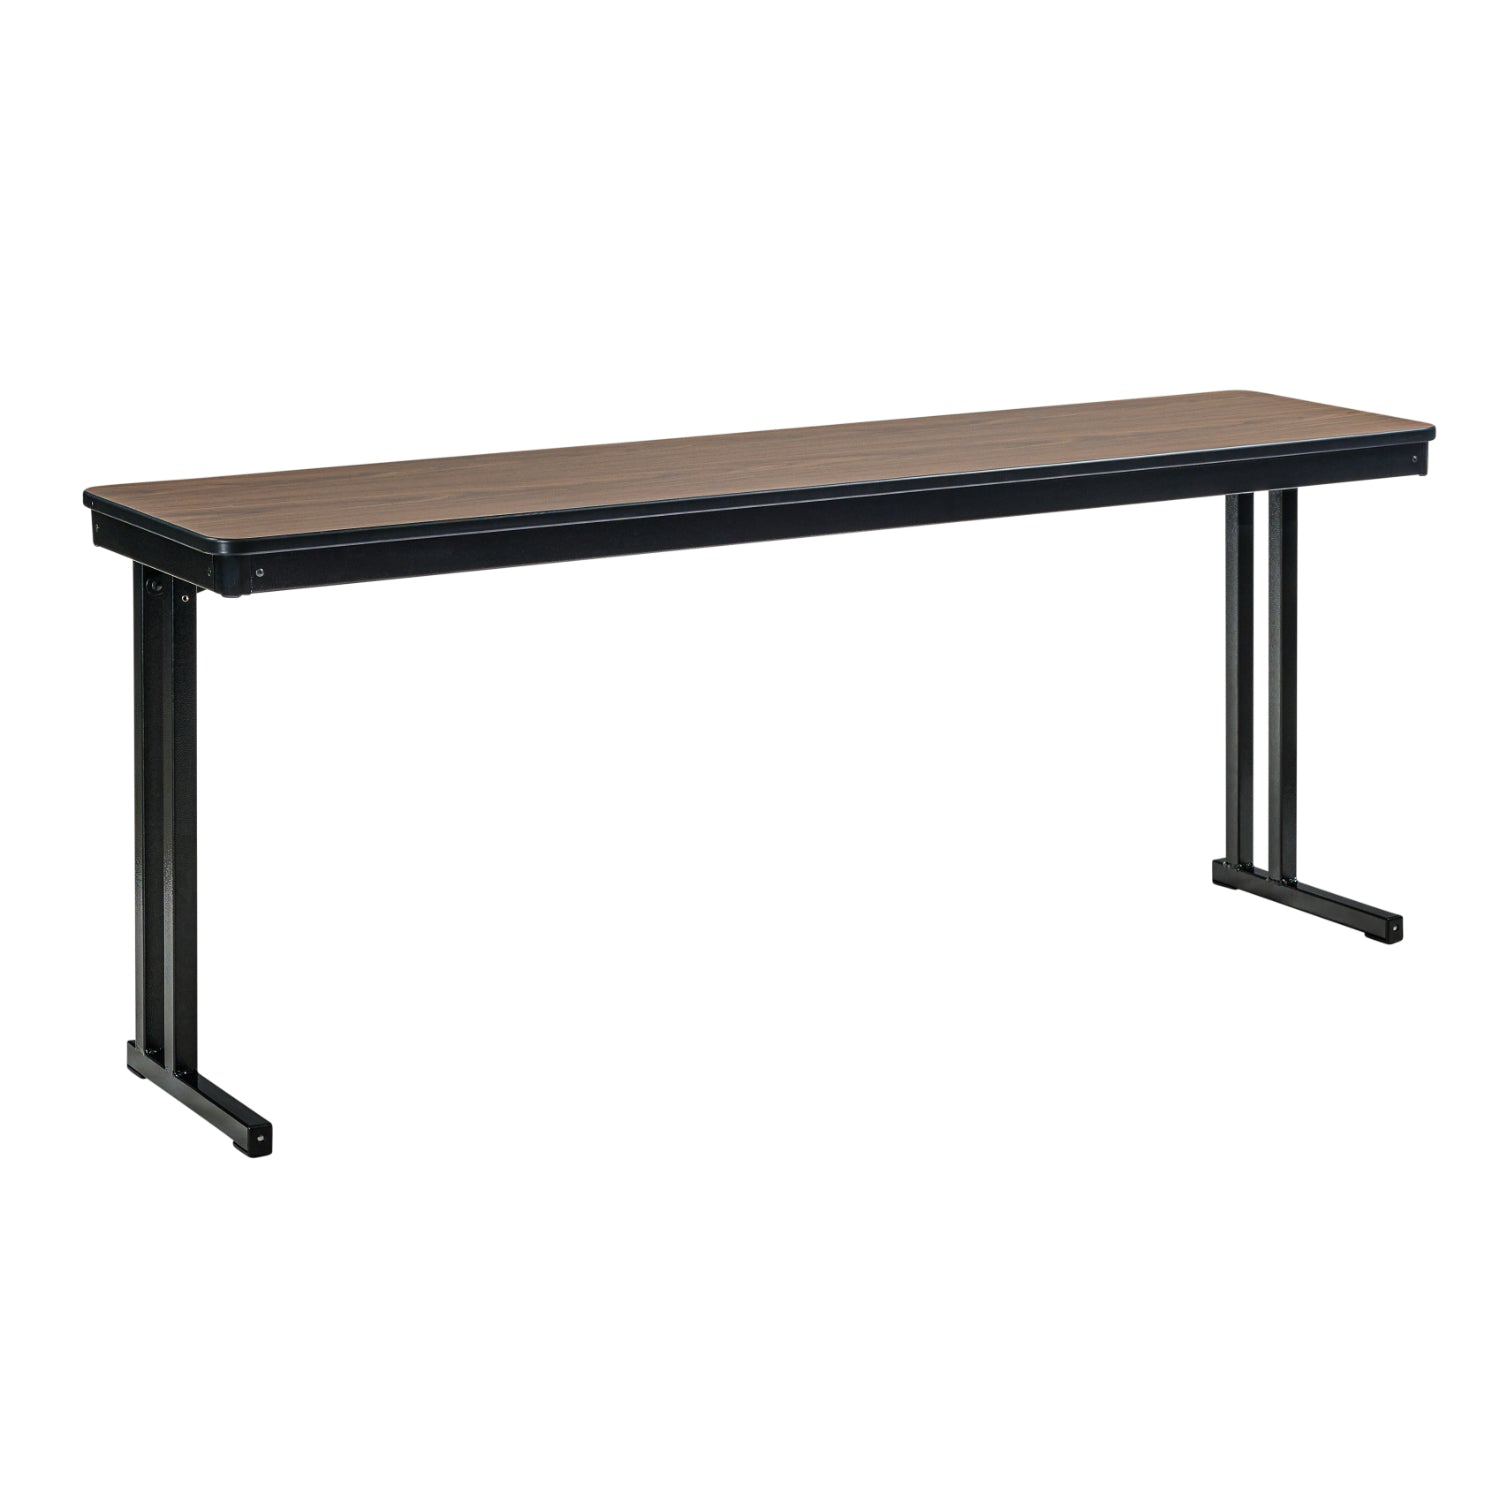 Max Seating Folding Training and Seminar Table with Cantilever Legs, 24" x 84", High Pressure Laminate Top with Plywood Core/T-Mold Edge